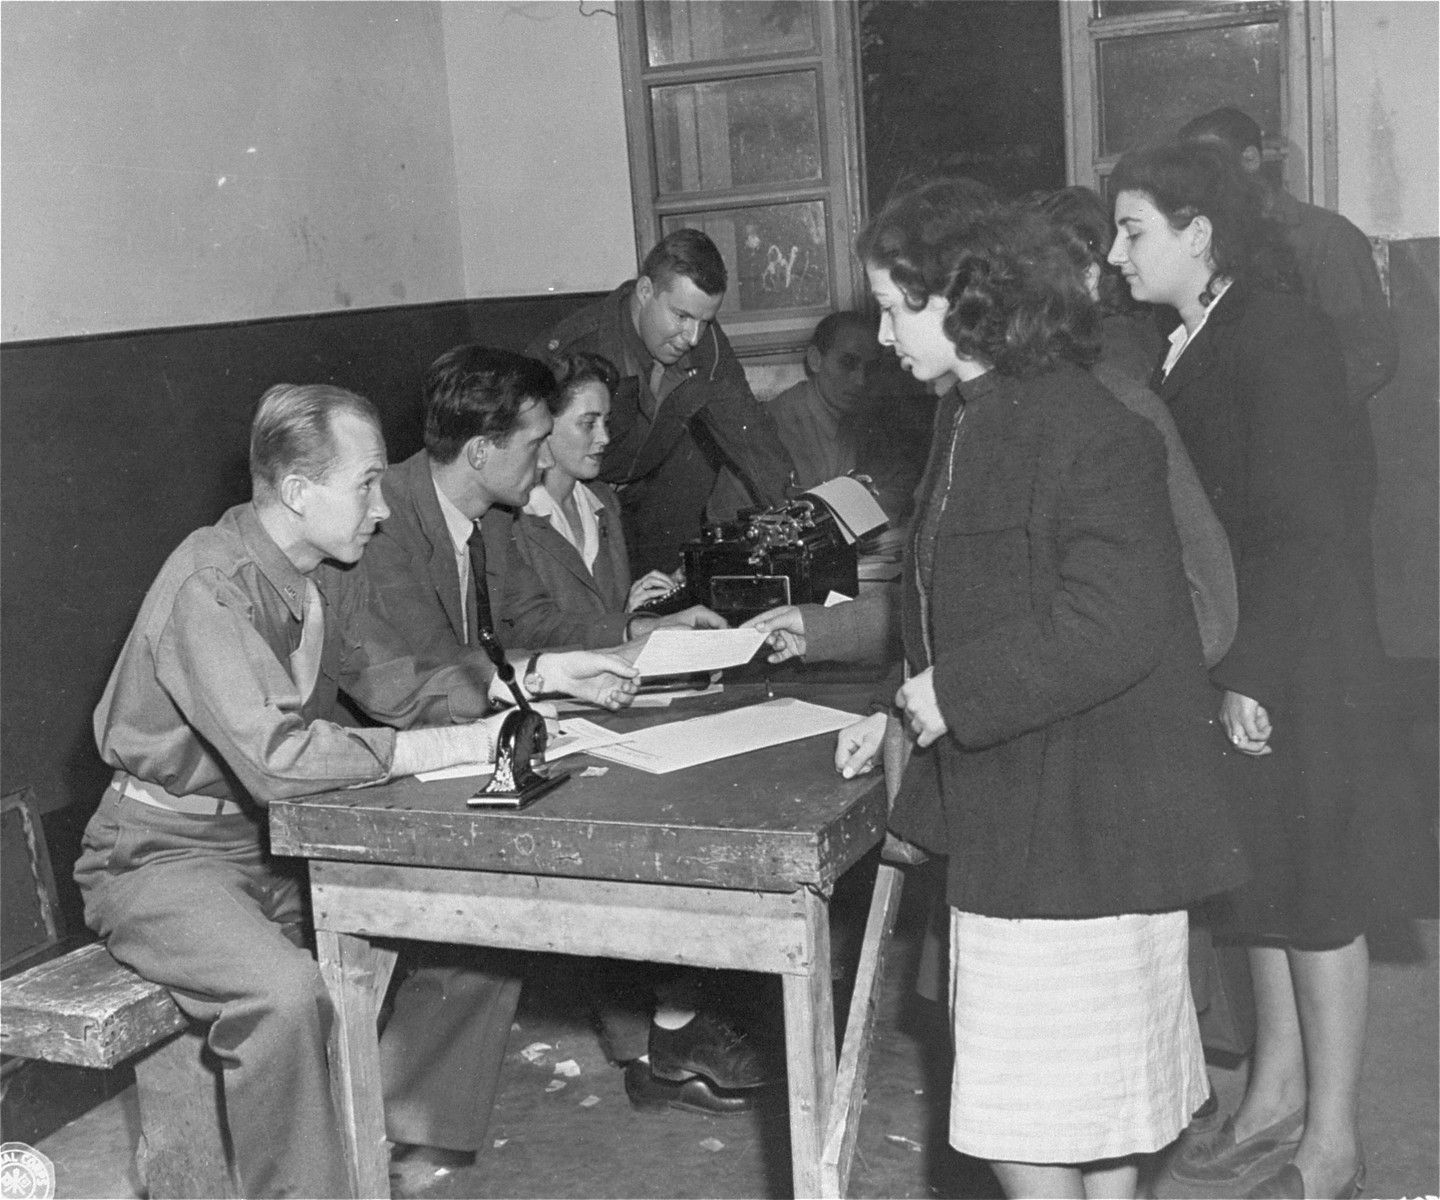 Jewish DPs en route to Palestine undergo a registration process in Rome.

Among those pictured are Eugene Hammond, representative of the Intergovernmental Commission on Refugees, and Major George Hartman, Allied Commission Repatriation Officer.